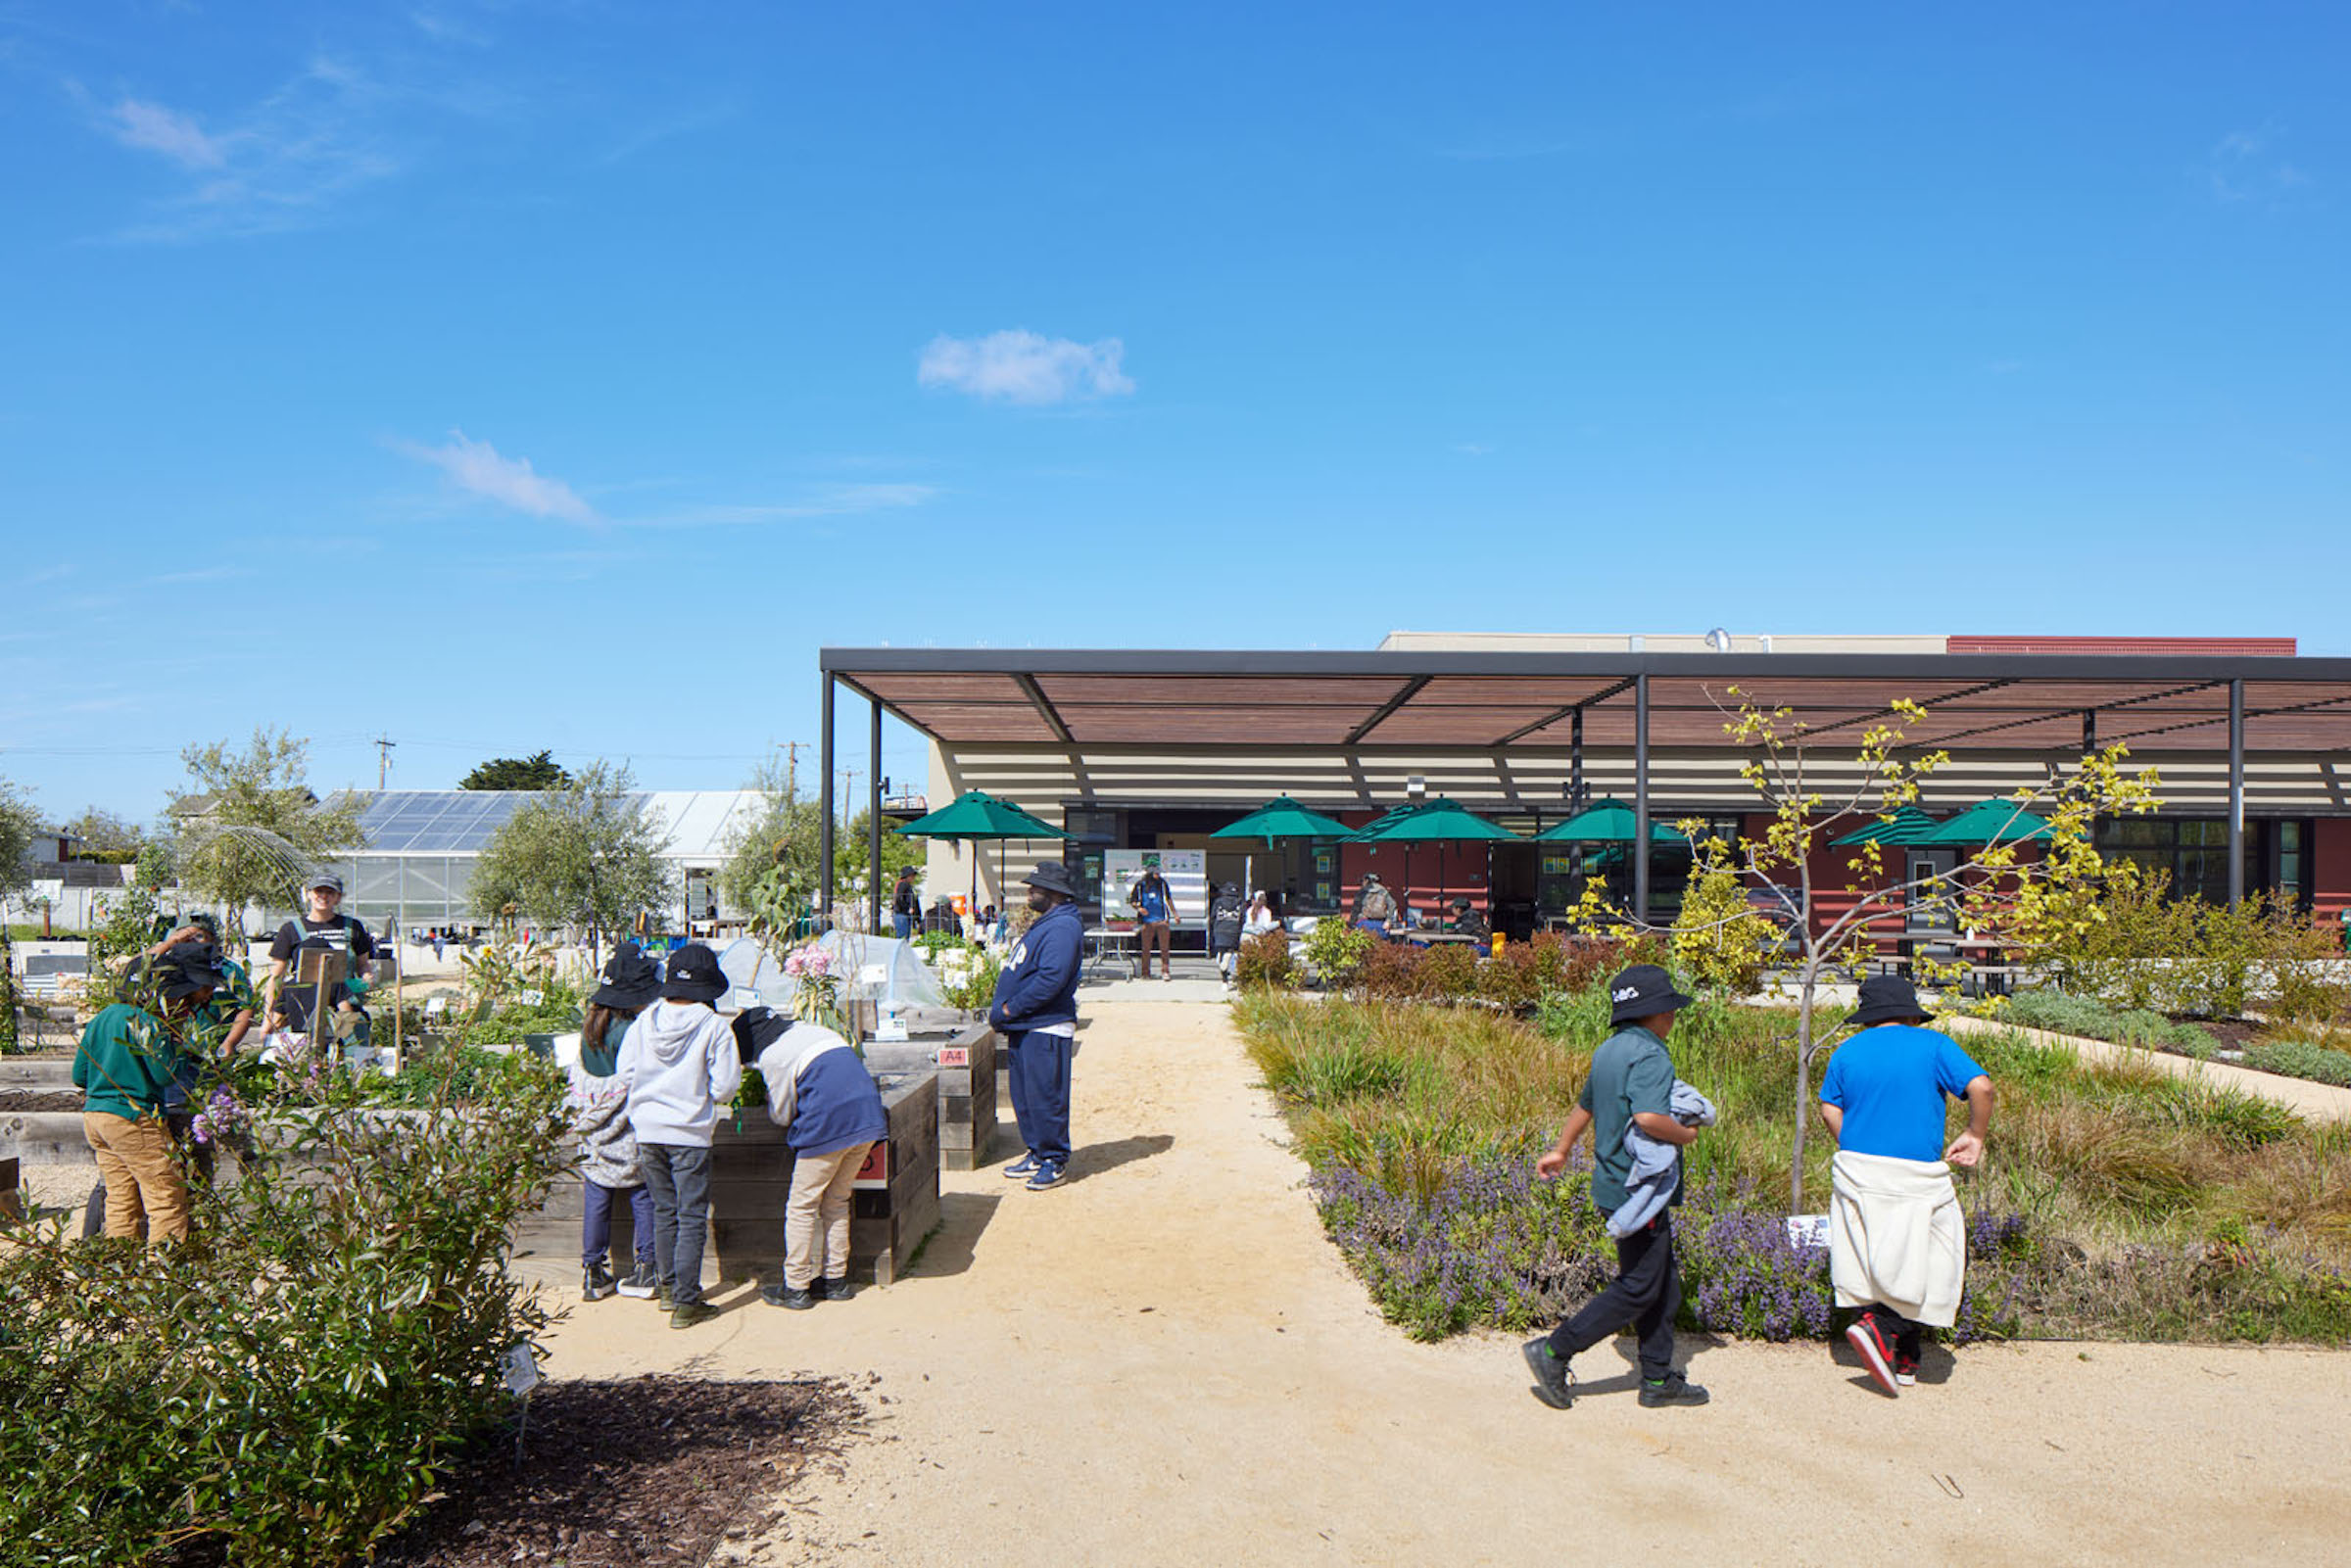 The Unified School District's central kitchen, learning farm and learning center were designed by CAW Architects